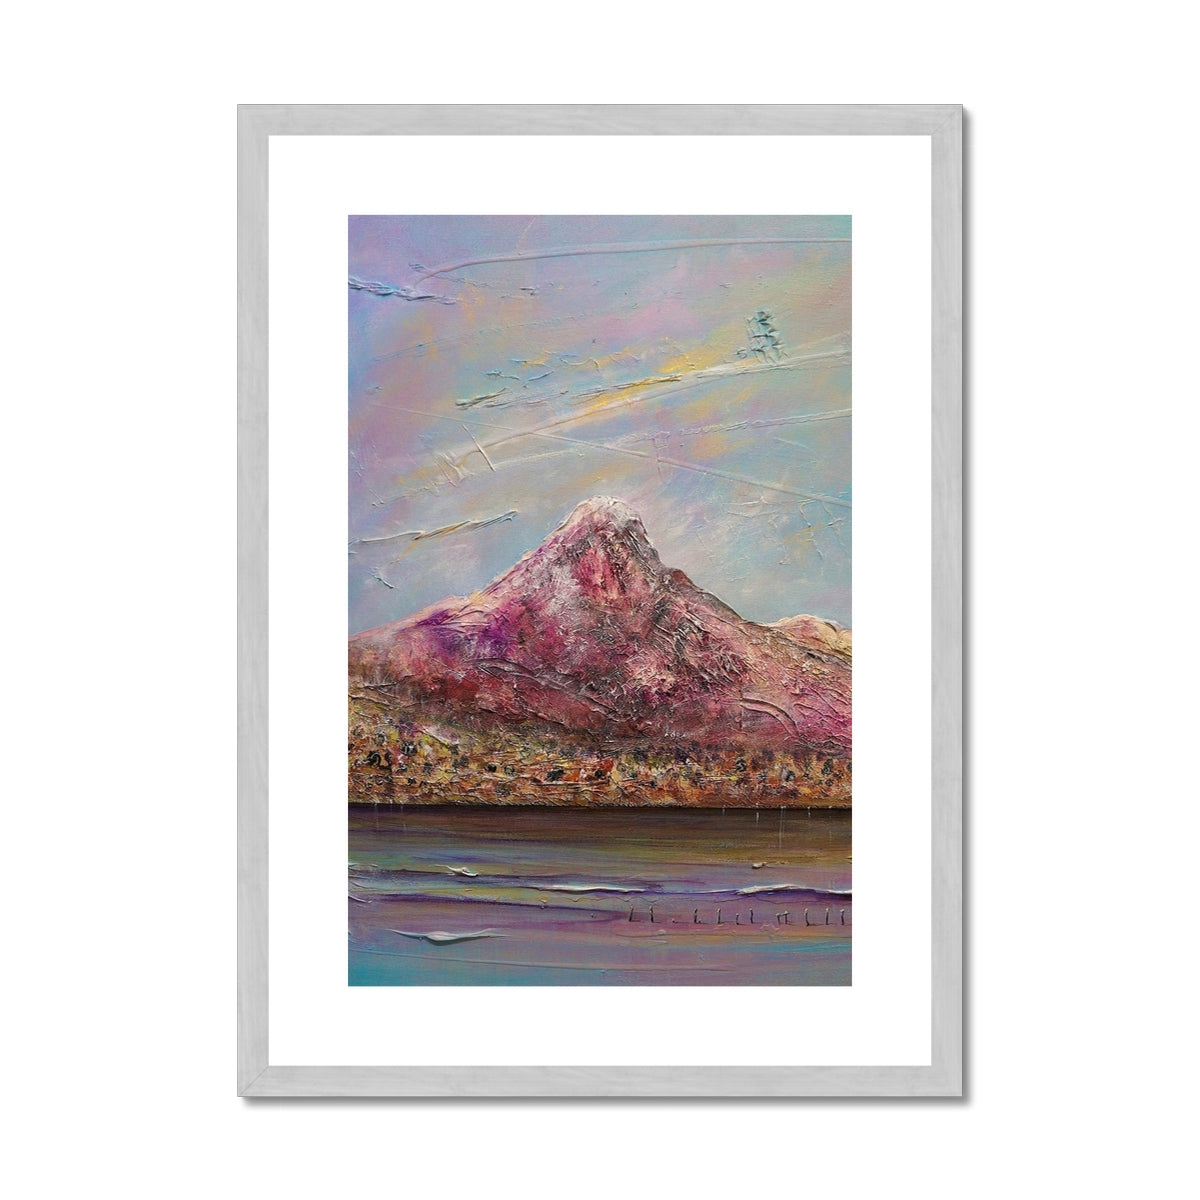 Ben Lomond Painting | Antique Framed & Mounted Prints From Scotland-Antique Framed & Mounted Prints-Scottish Lochs & Mountains Art Gallery-A2 Portrait-Silver Frame-Paintings, Prints, Homeware, Art Gifts From Scotland By Scottish Artist Kevin Hunter